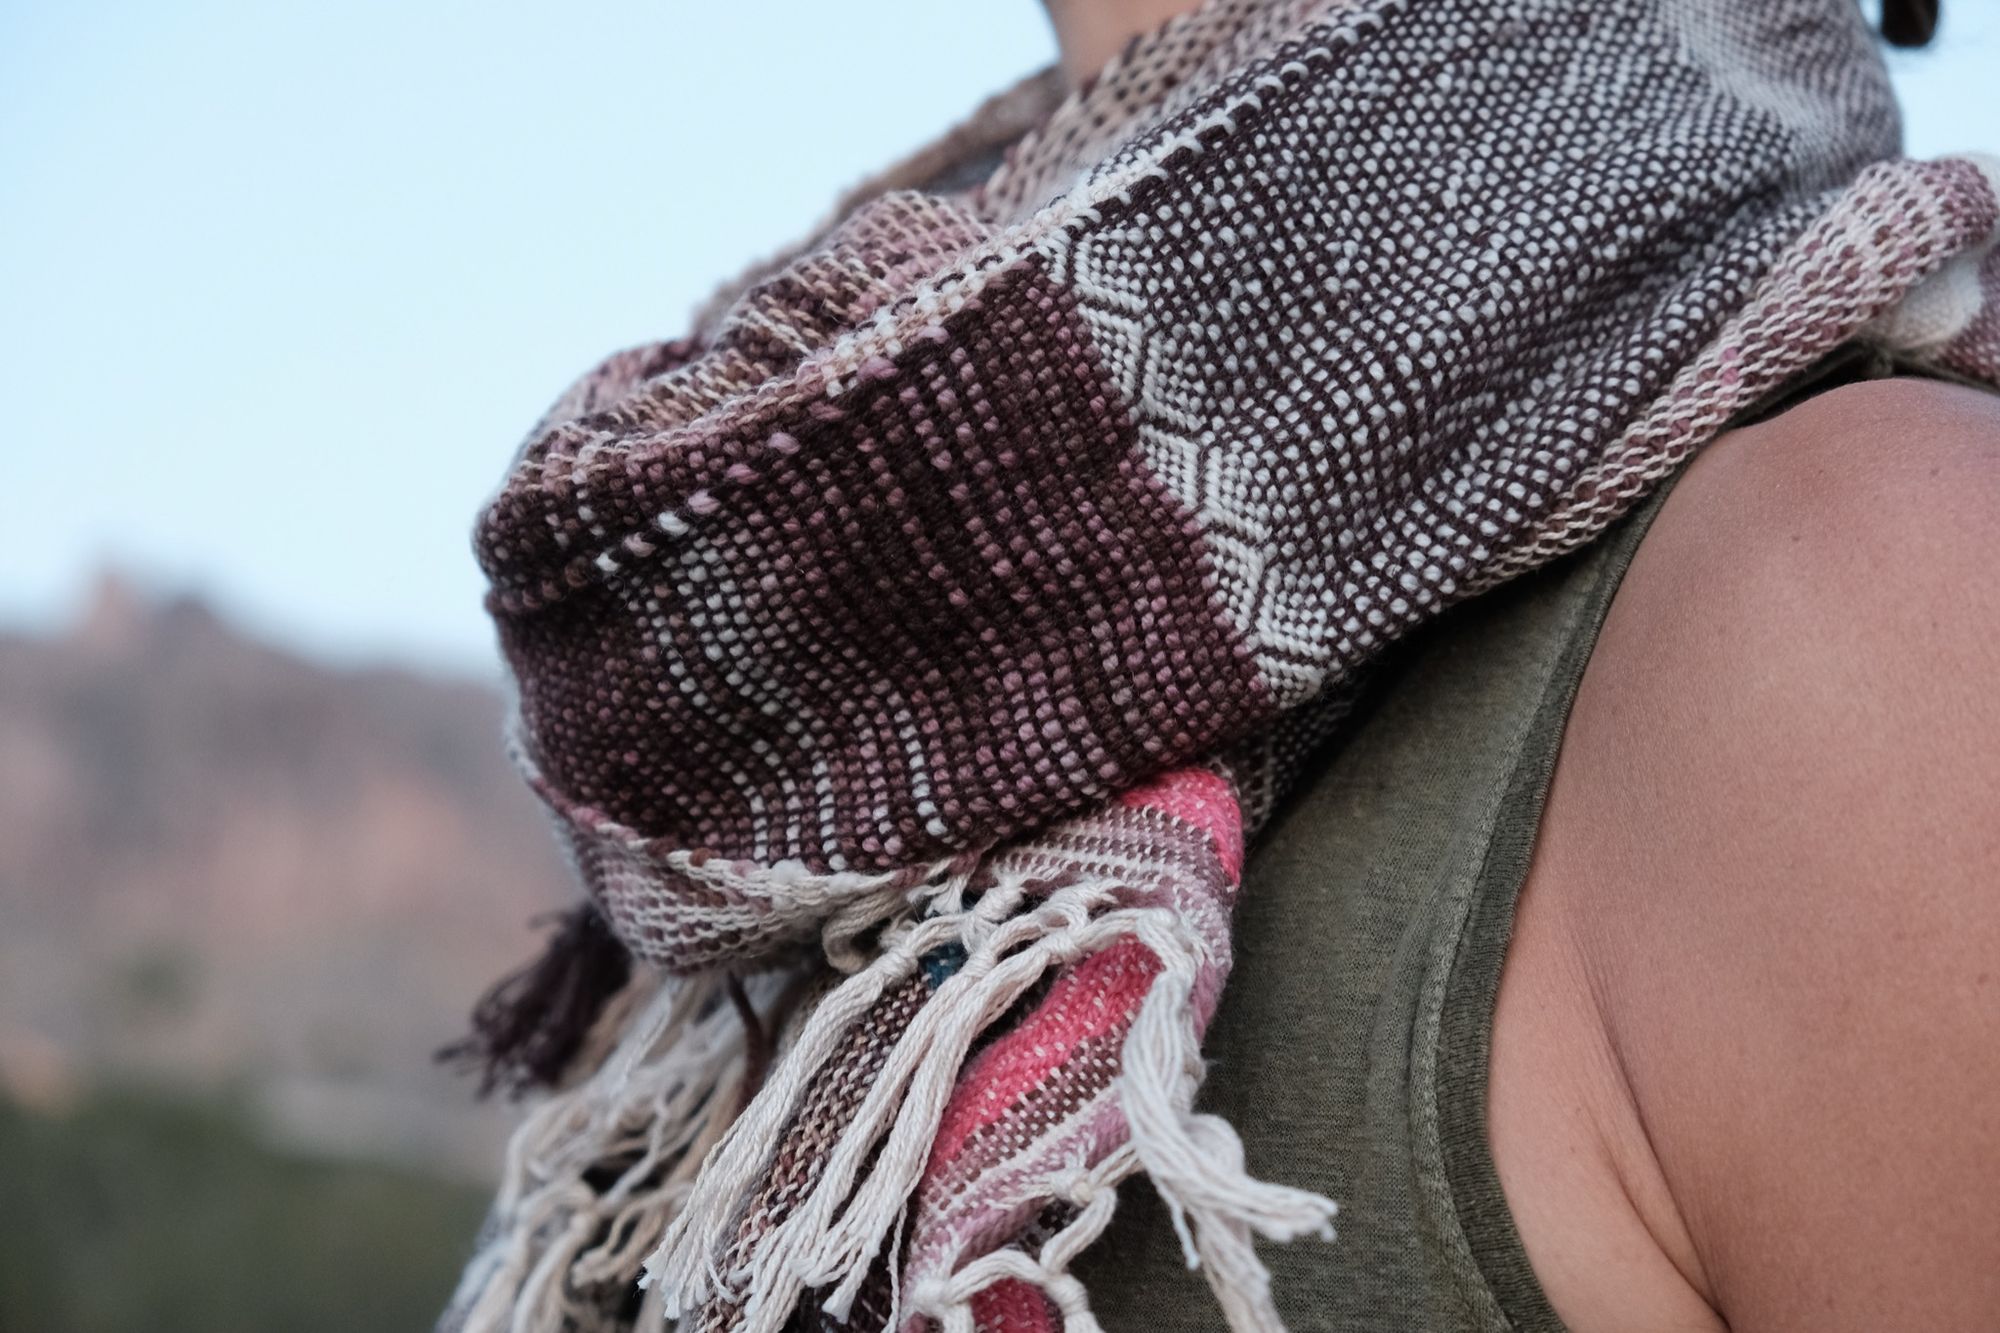 Woman wearing a blue, maroon, white, brown and pink scarf in the desert with cactus, shrubs and mountains in the background. 